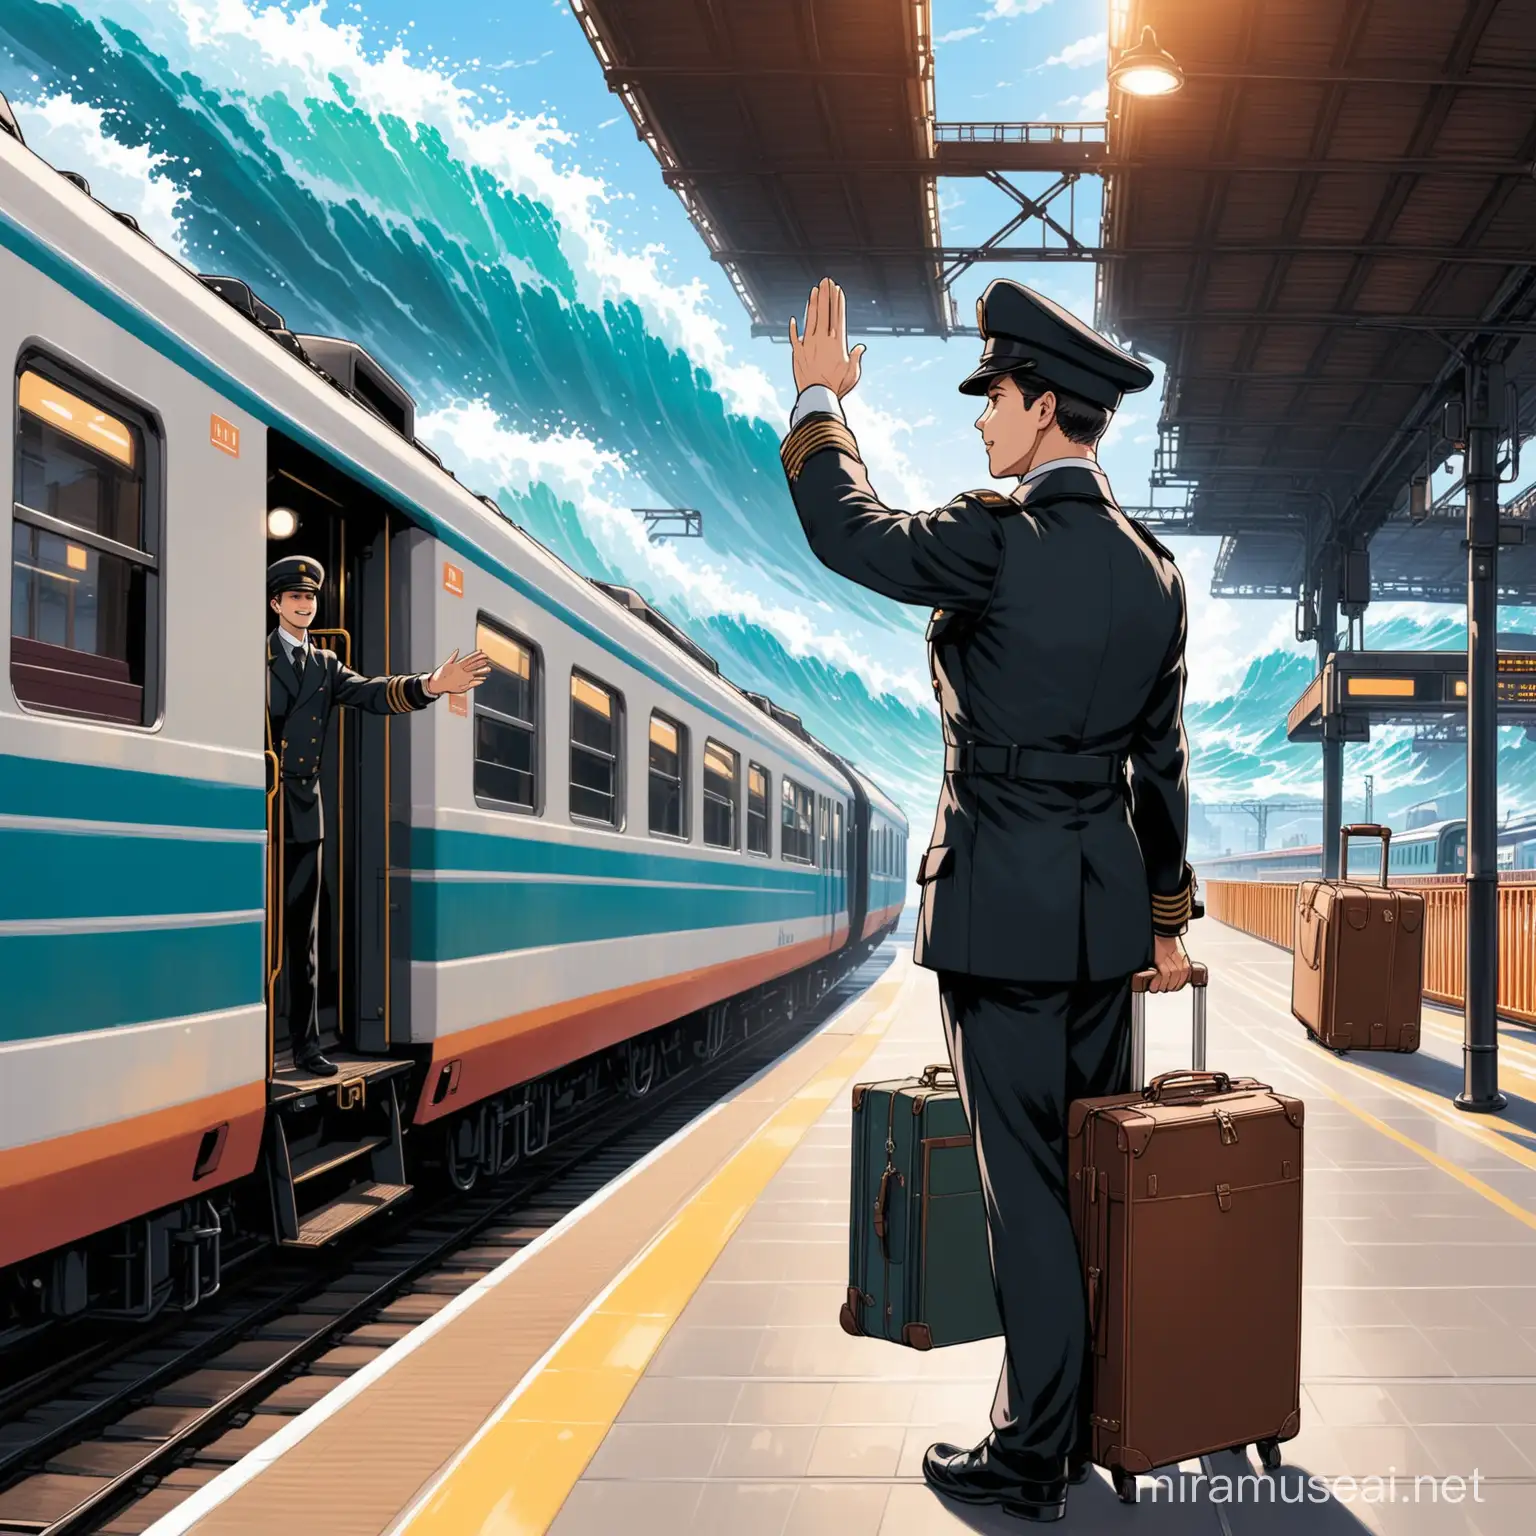 Train Conductor Greeting Passenger with Suitcase on Platform